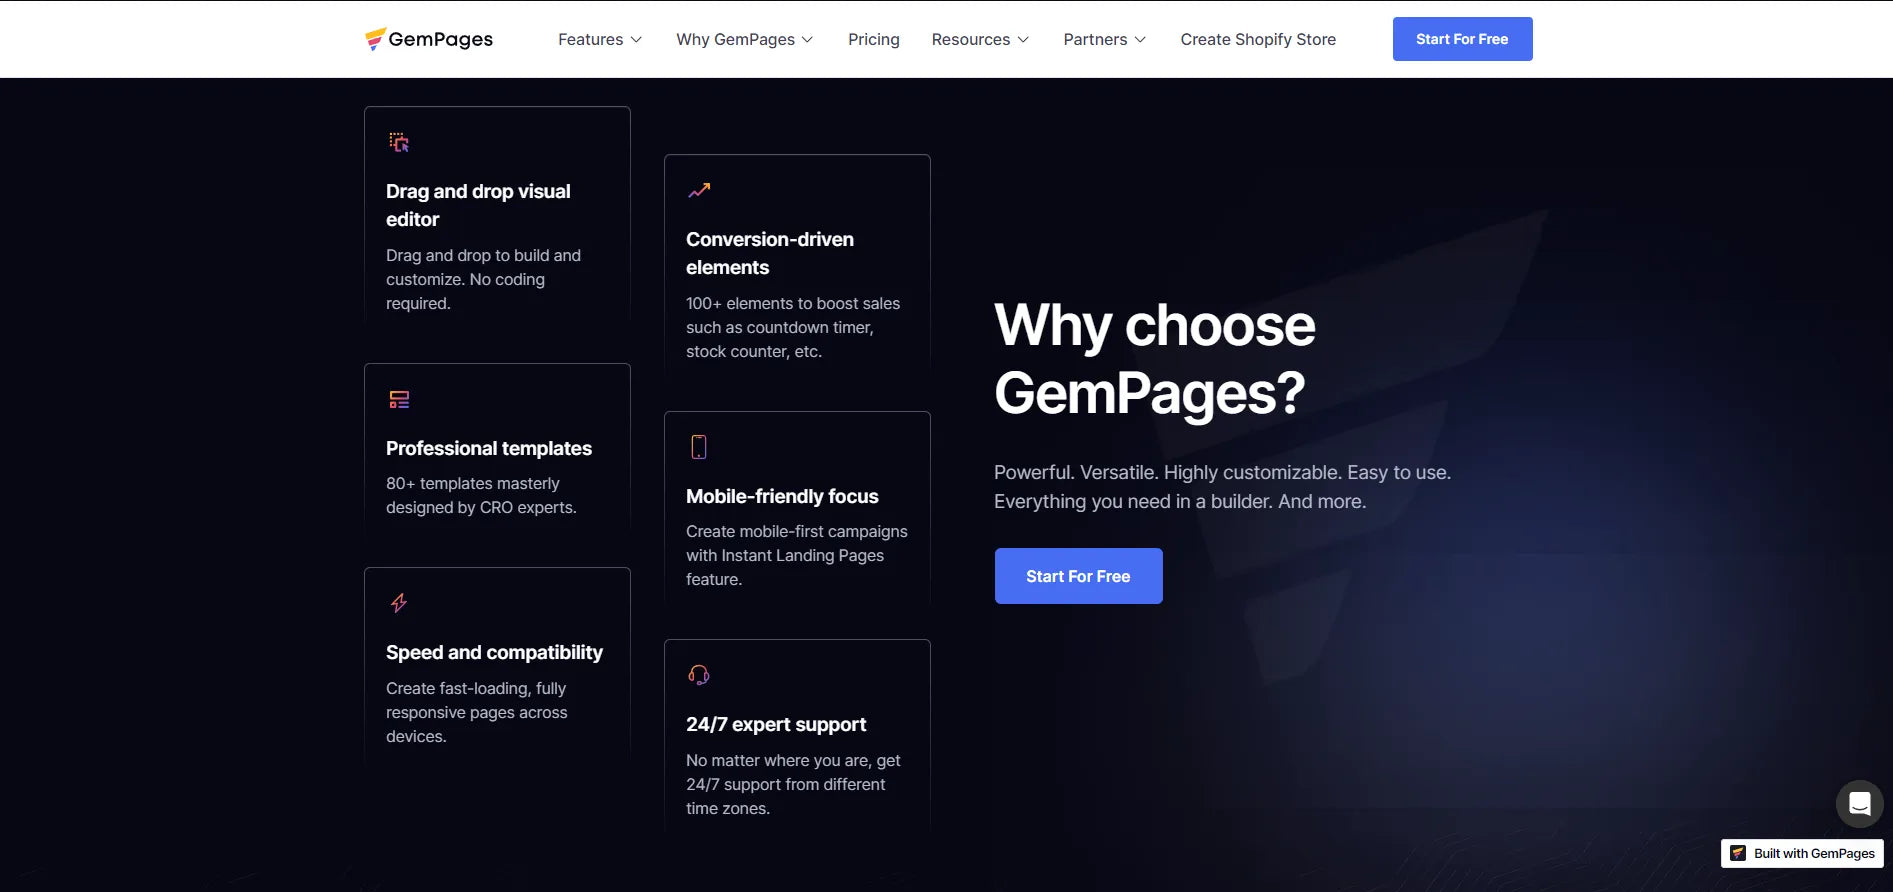 Why choose GemPages